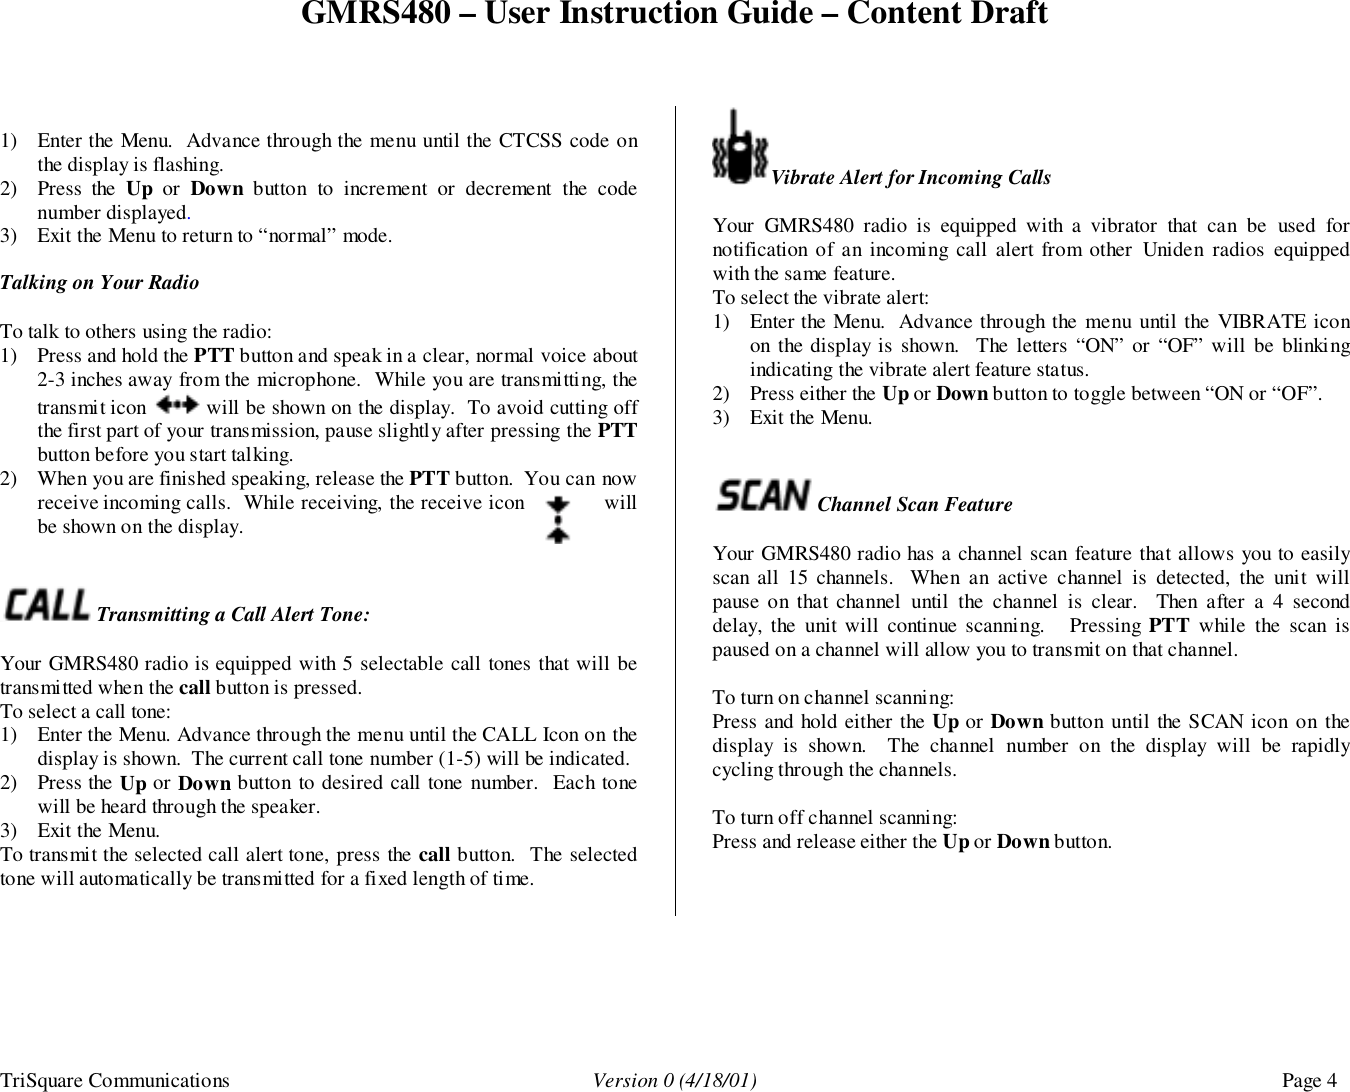 GMRS480 – User Instruction Guide – Content DraftTriSquare Communications Version 0 (4/18/01) Page 41) Enter the Menu.  Advance through the menu until the CTCSS code onthe display is flashing.2) Press the Up or Down button to increment or decrement the codenumber displayed.3) Exit the Menu to return to “normal” mode.Talking on Your RadioTo talk to others using the radio:1) Press and hold the PTT button and speak in a clear, normal voice about2-3 inches away from the microphone.  While you are transmitting, thetransmit icon   will be shown on the display.  To avoid cutting offthe first part of your transmission, pause slightly after pressing the PTTbutton before you start talking.2) When you are finished speaking, release the PTT button.  You can nowreceive incoming calls.  While receiving, the receive icon willbe shown on the display. Transmitting a Call Alert Tone:Your GMRS480 radio is equipped with 5 selectable call tones that will betransmitted when the call button is pressed.To select a call tone:1) Enter the Menu. Advance through the menu until the CALL Icon on thedisplay is shown.  The current call tone number (1-5) will be indicated.2) Press the Up or Down button to desired call tone number.  Each tonewill be heard through the speaker.3) Exit the Menu.To transmit the selected call alert tone, press the call button.  The selectedtone will automatically be transmitted for a fixed length of time.Vibrate Alert for Incoming CallsYour GMRS480 radio is equipped with a vibrator that can be used fornotification of an incoming call alert from other Uniden radios equippedwith the same feature.To select the vibrate alert:1) Enter the Menu.  Advance through the menu until the VIBRATE iconon the display is shown.  The letters “ON” or “OF” will be blinkingindicating the vibrate alert feature status.2) Press either the Up or Down button to toggle between “ON or “OF”.3) Exit the Menu. Channel Scan FeatureYour GMRS480 radio has a channel scan feature that allows you to easilyscan all 15 channels.  When an active channel is detected, the unit willpause on that channel until the channel is clear.  Then after a 4 seconddelay, the unit will continue scanning.   Pressing PTT  while the scan ispaused on a channel will allow you to transmit on that channel.To turn on channel scanning:Press and hold either the Up or Down button until the SCAN icon on thedisplay is shown.  The channel number on the display will be rapidlycycling through the channels.To turn off channel scanning:Press and release either the Up or Down button.